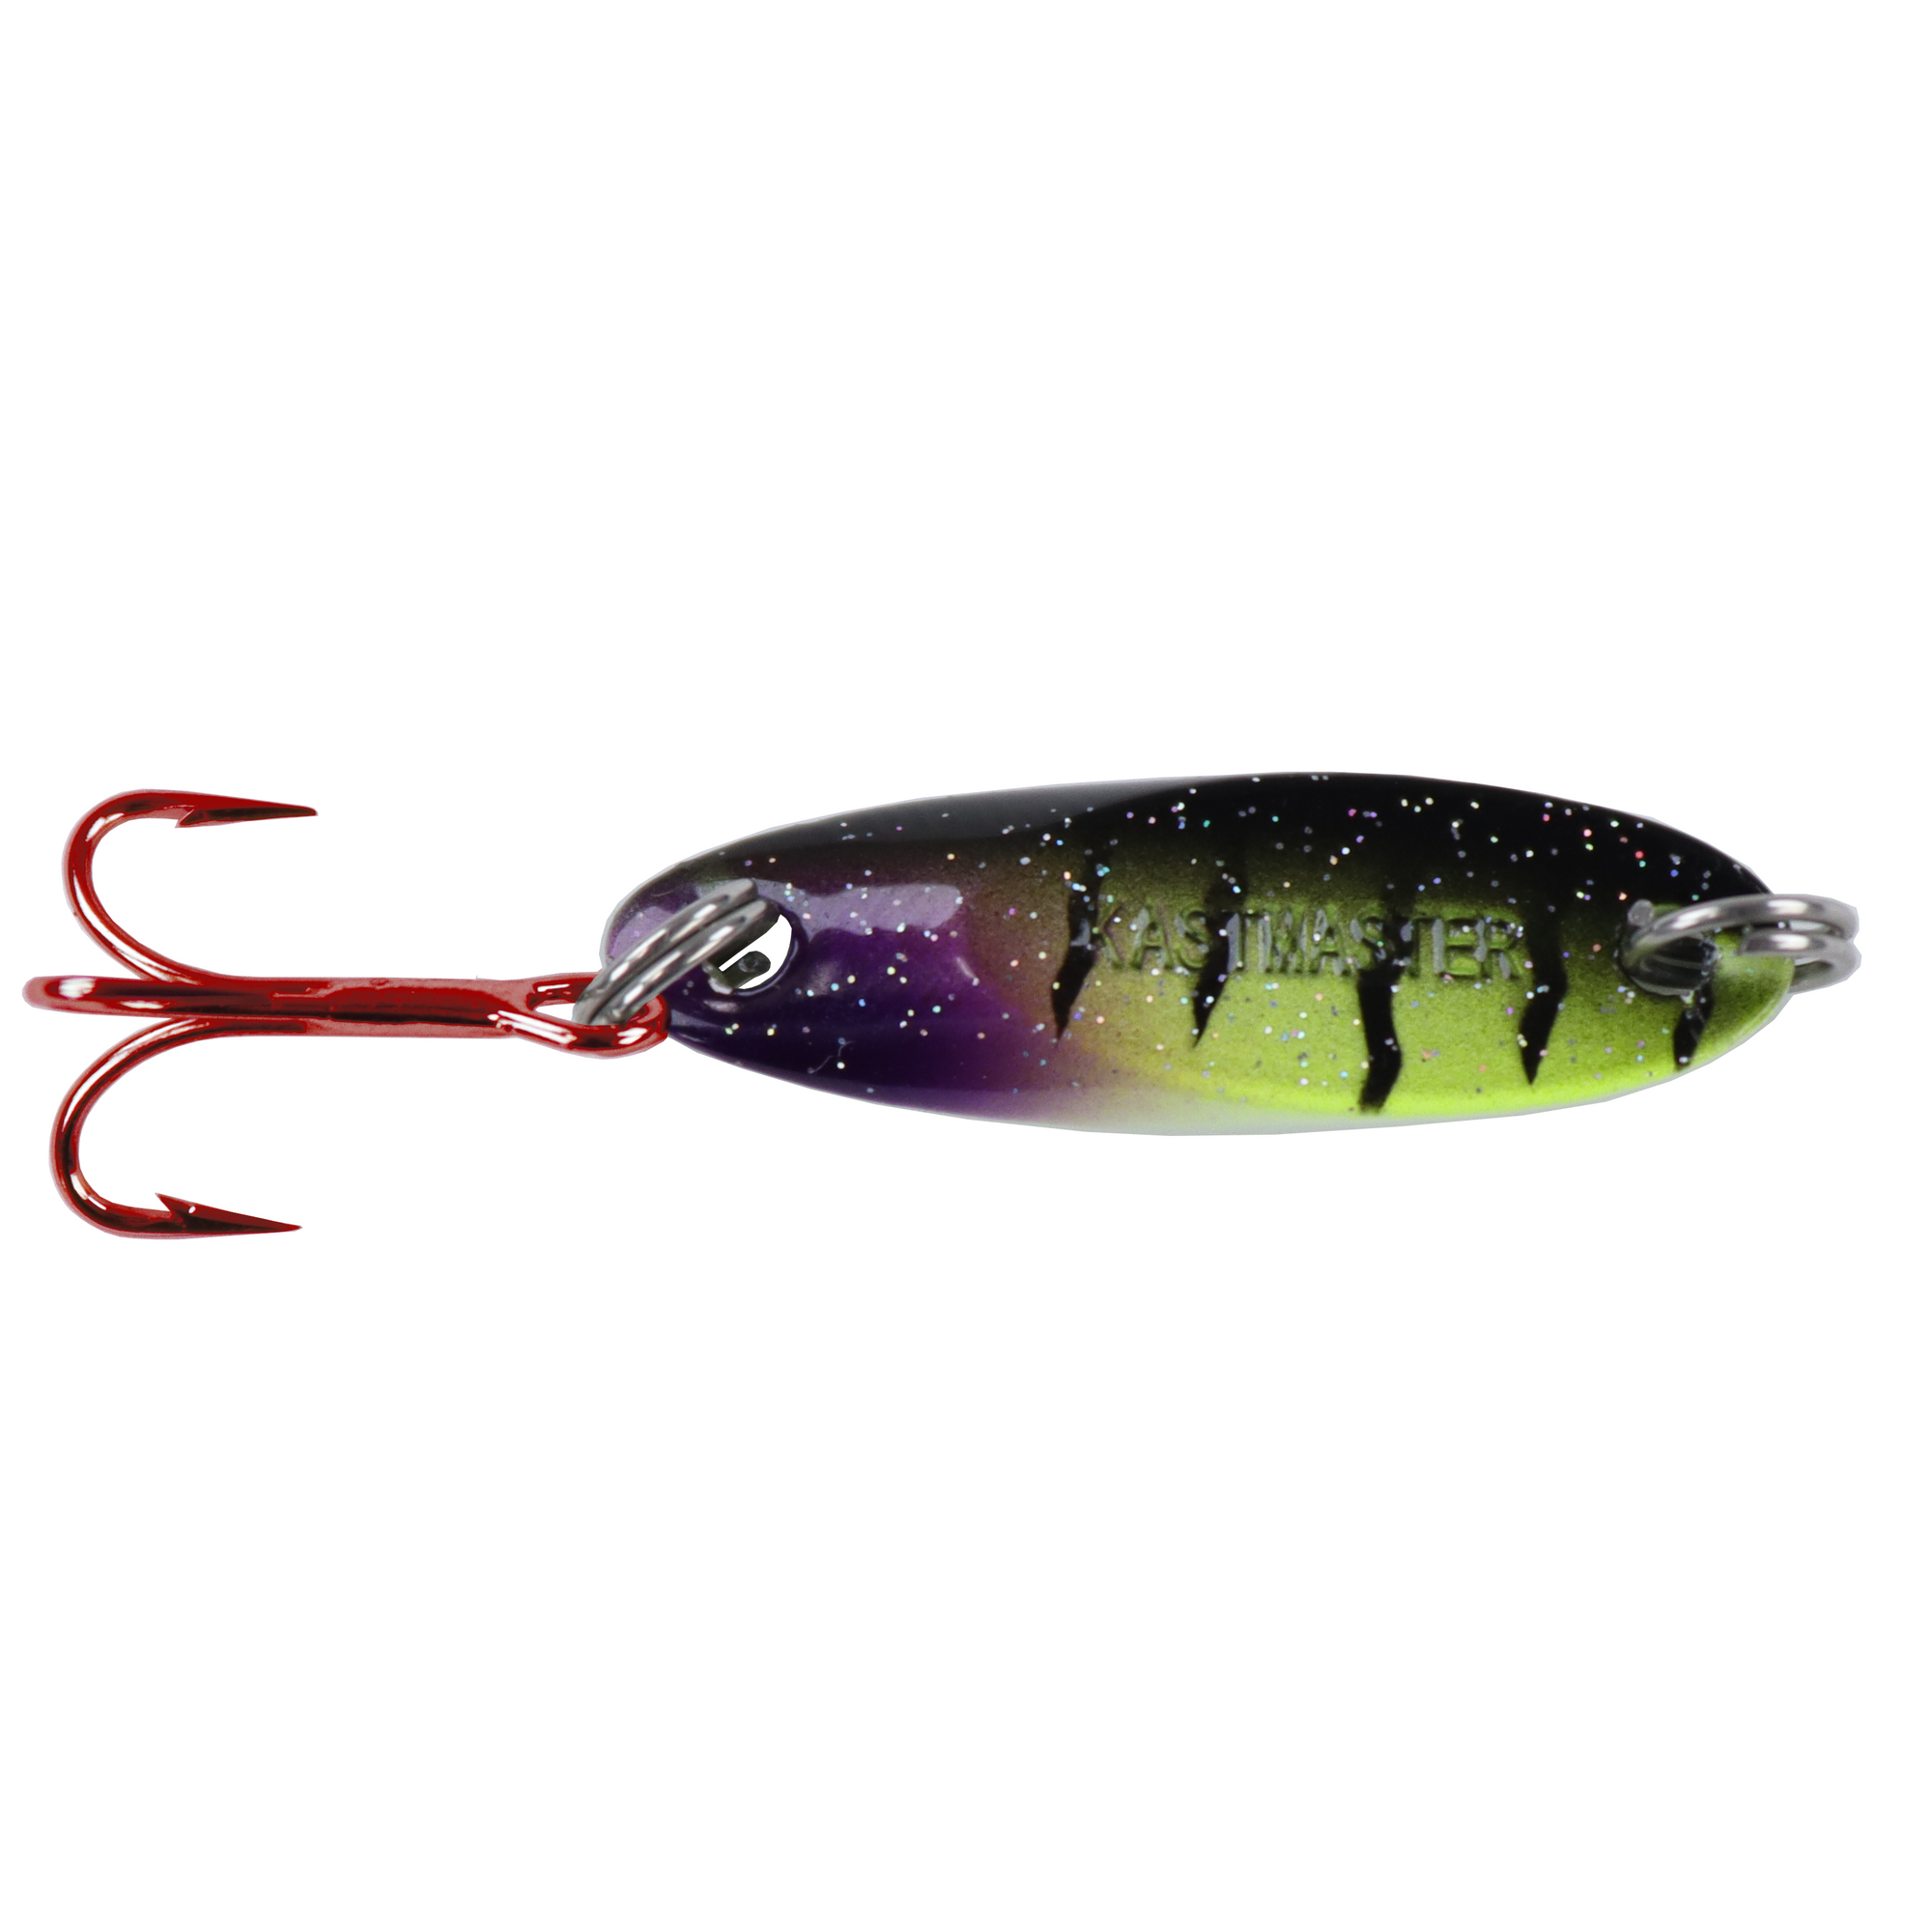  Acme Tackle Phoebe 1/12Oz Fire Tiger : Fishing Lure Kits :  Sports & Outdoors